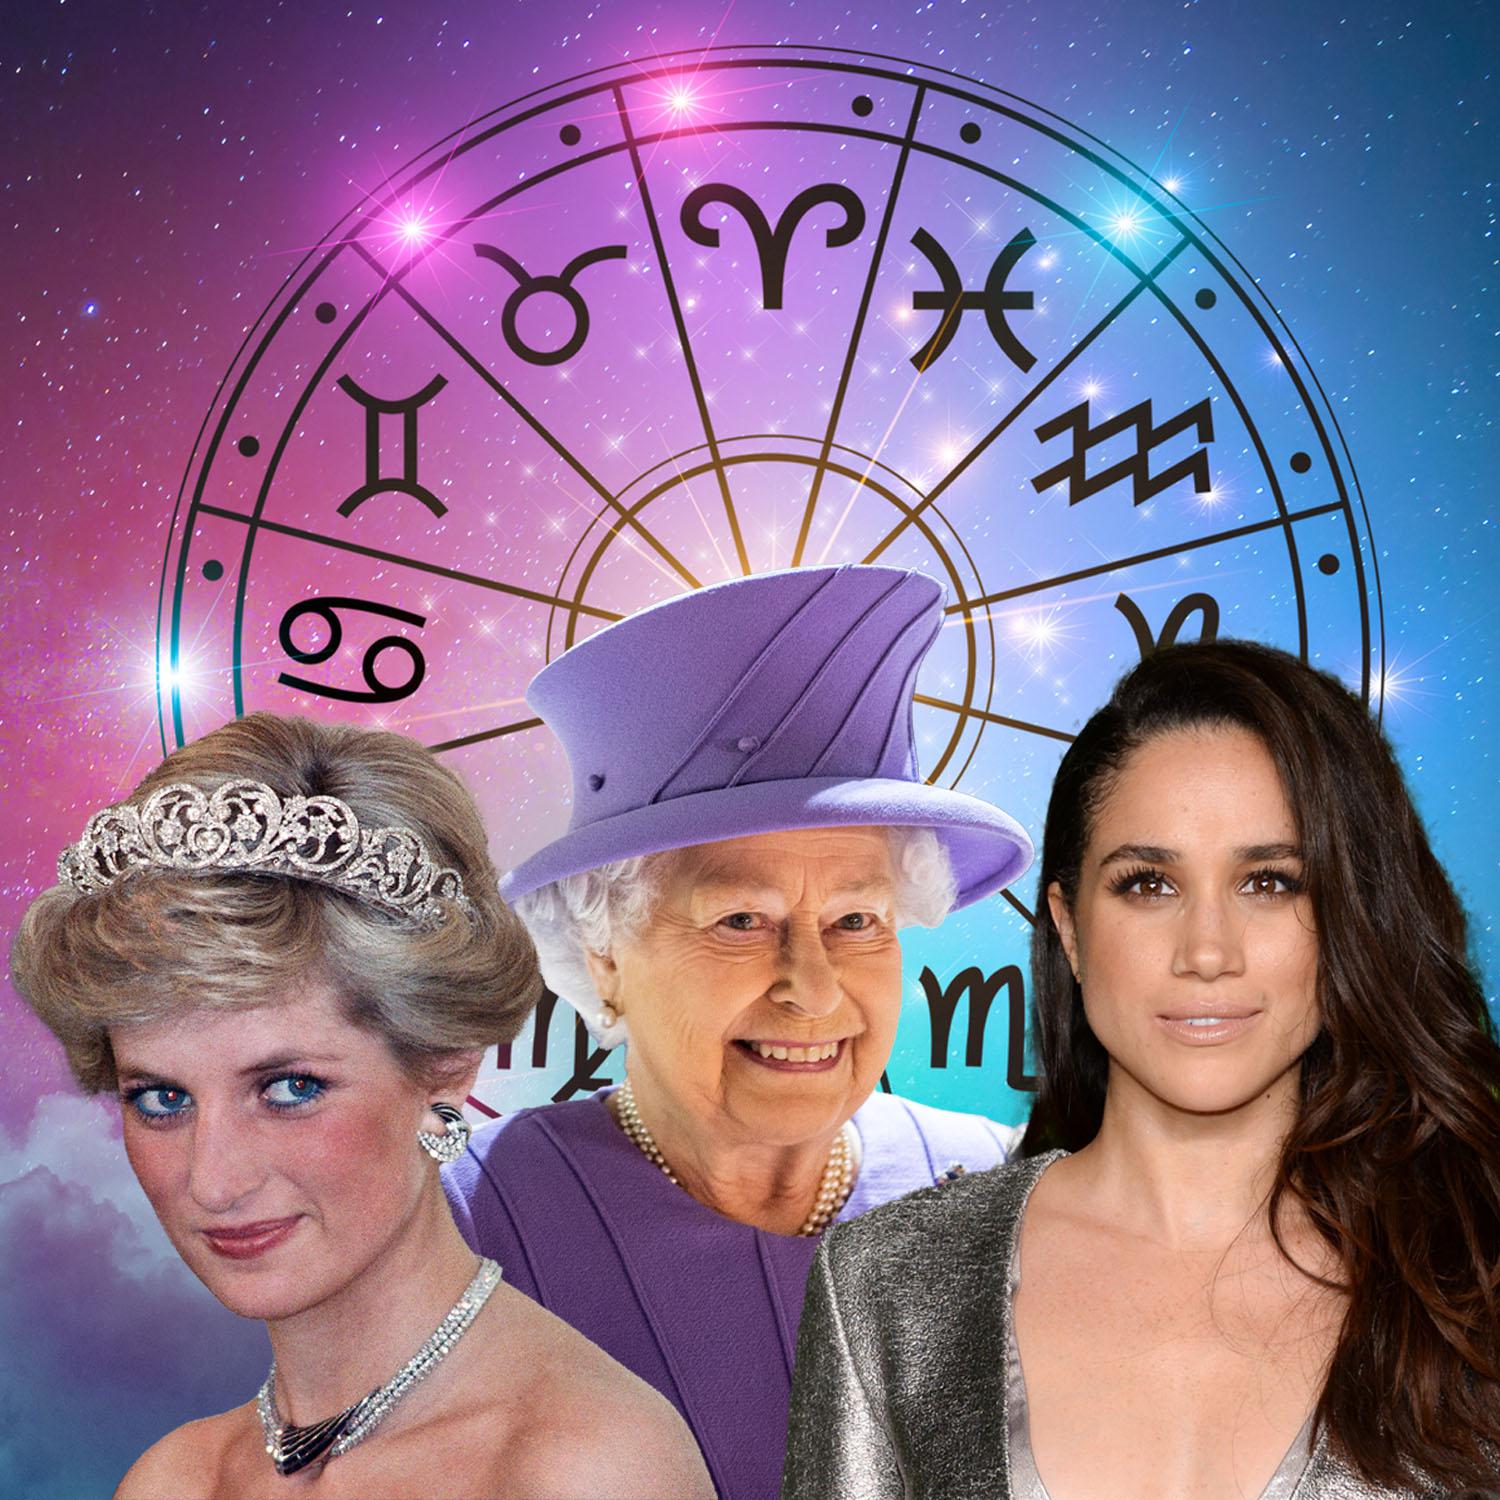 Which Royal Family Member Are You, According to the Horoscope?